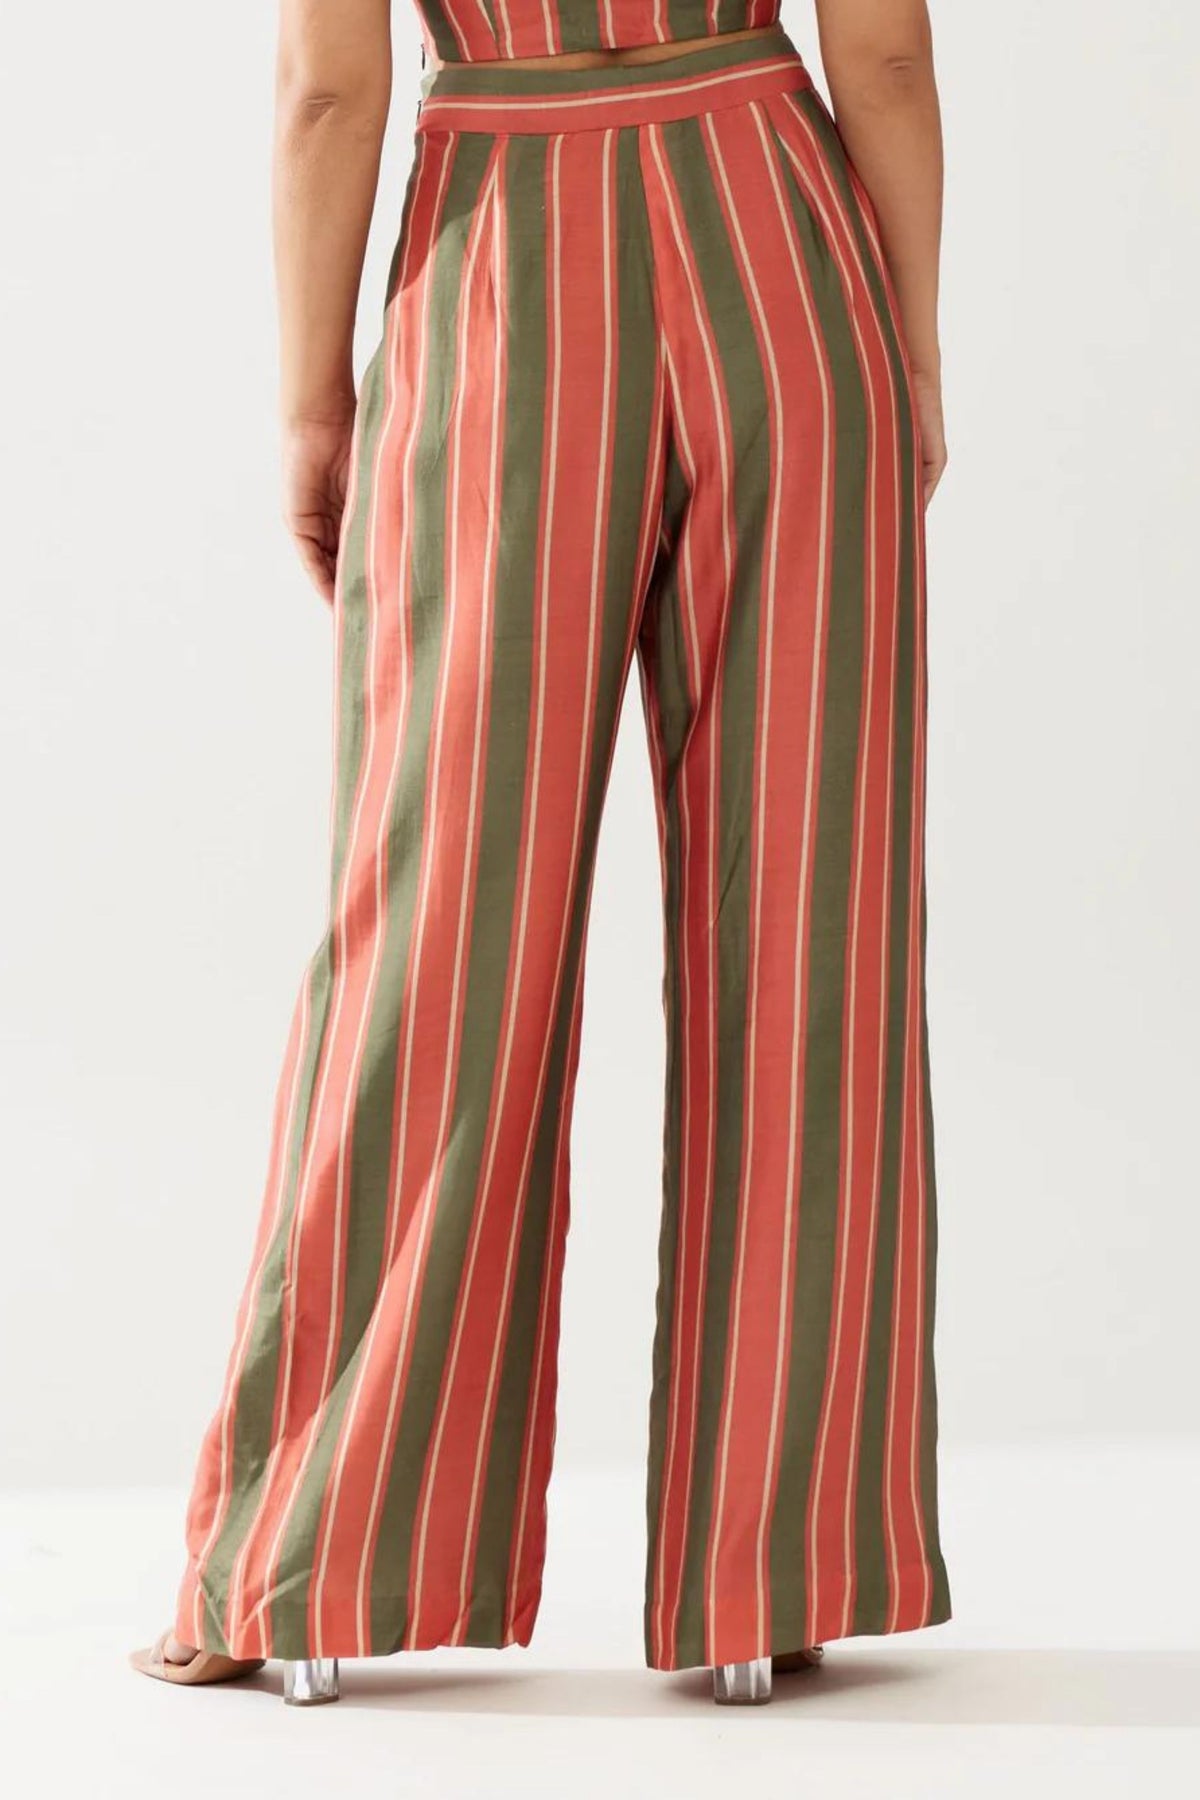 Red, Green And Cream Pants